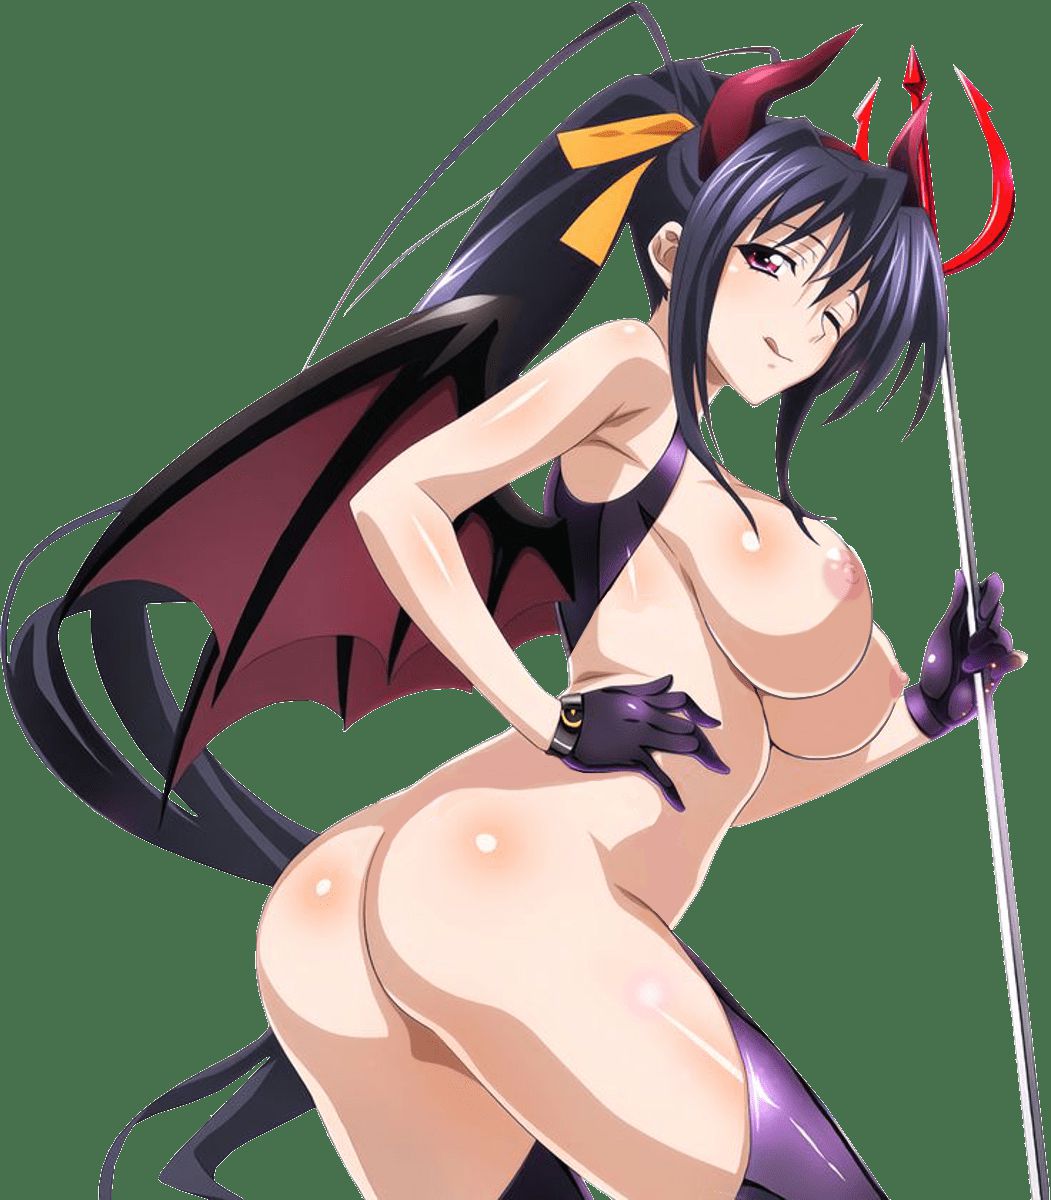 [Anime character material] png background of animated characters erotic images part 90 10